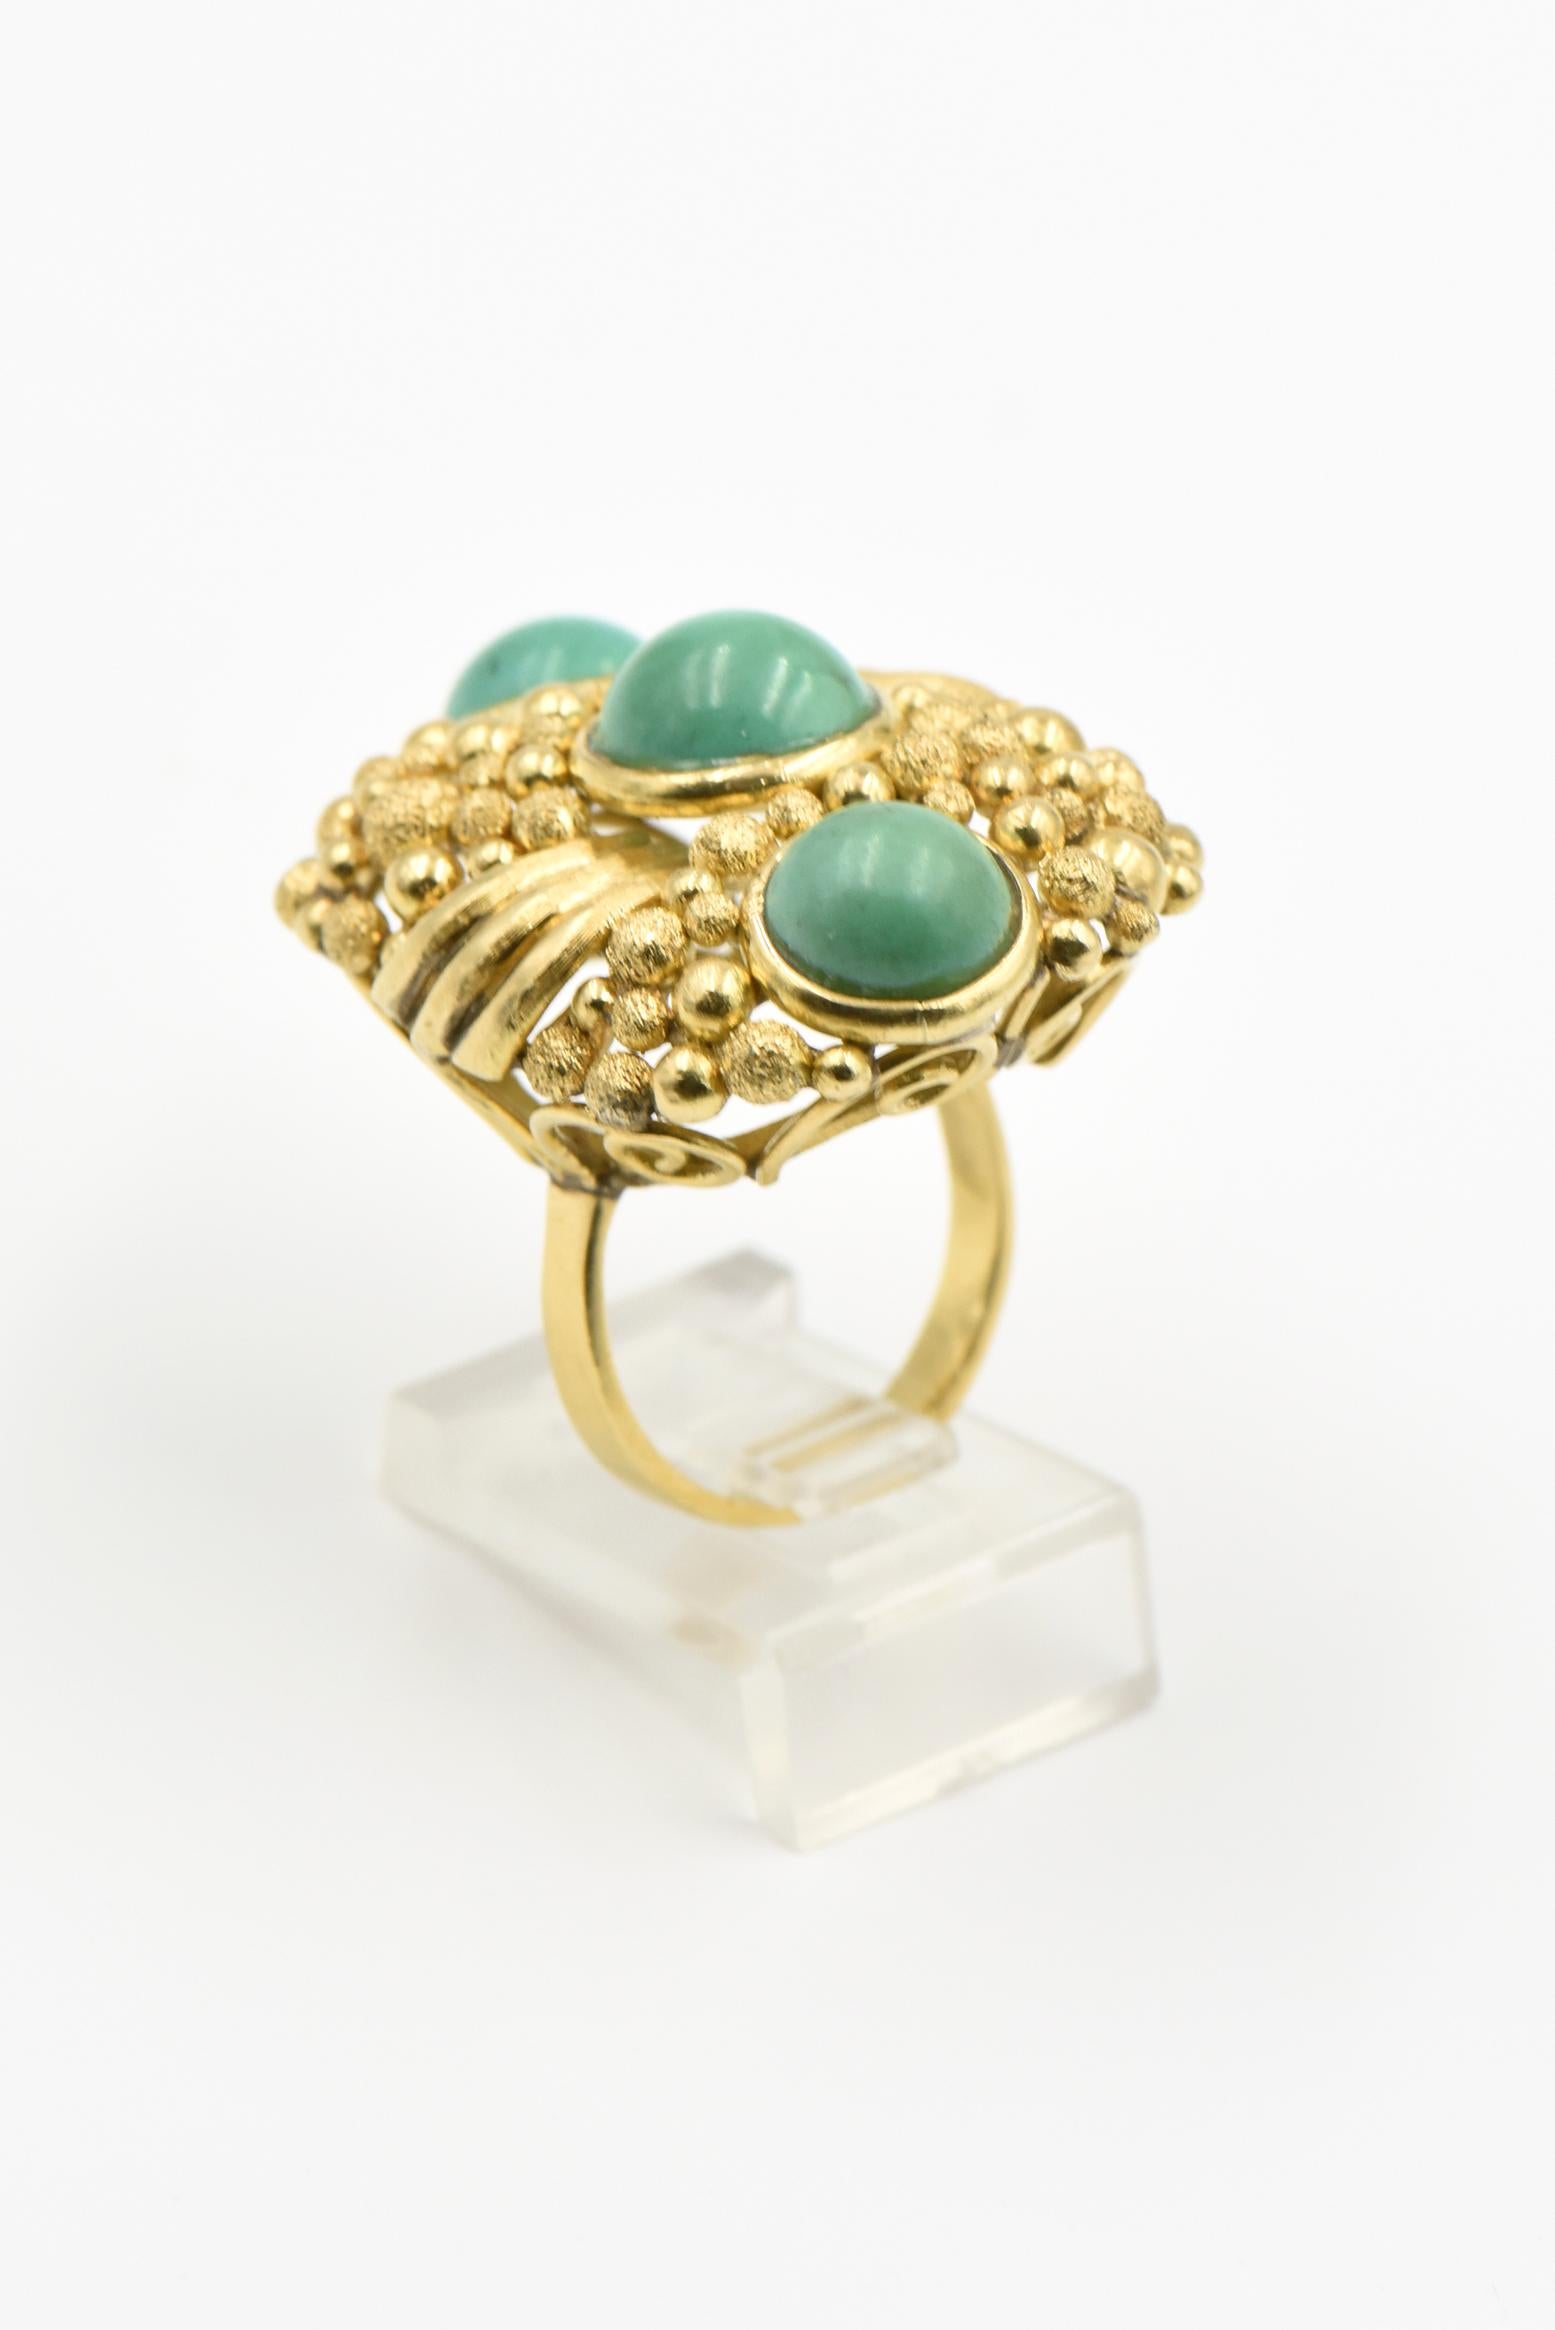 Large 1970s Modern Textured Design Turquoise Gold Statement Ring For Sale 3